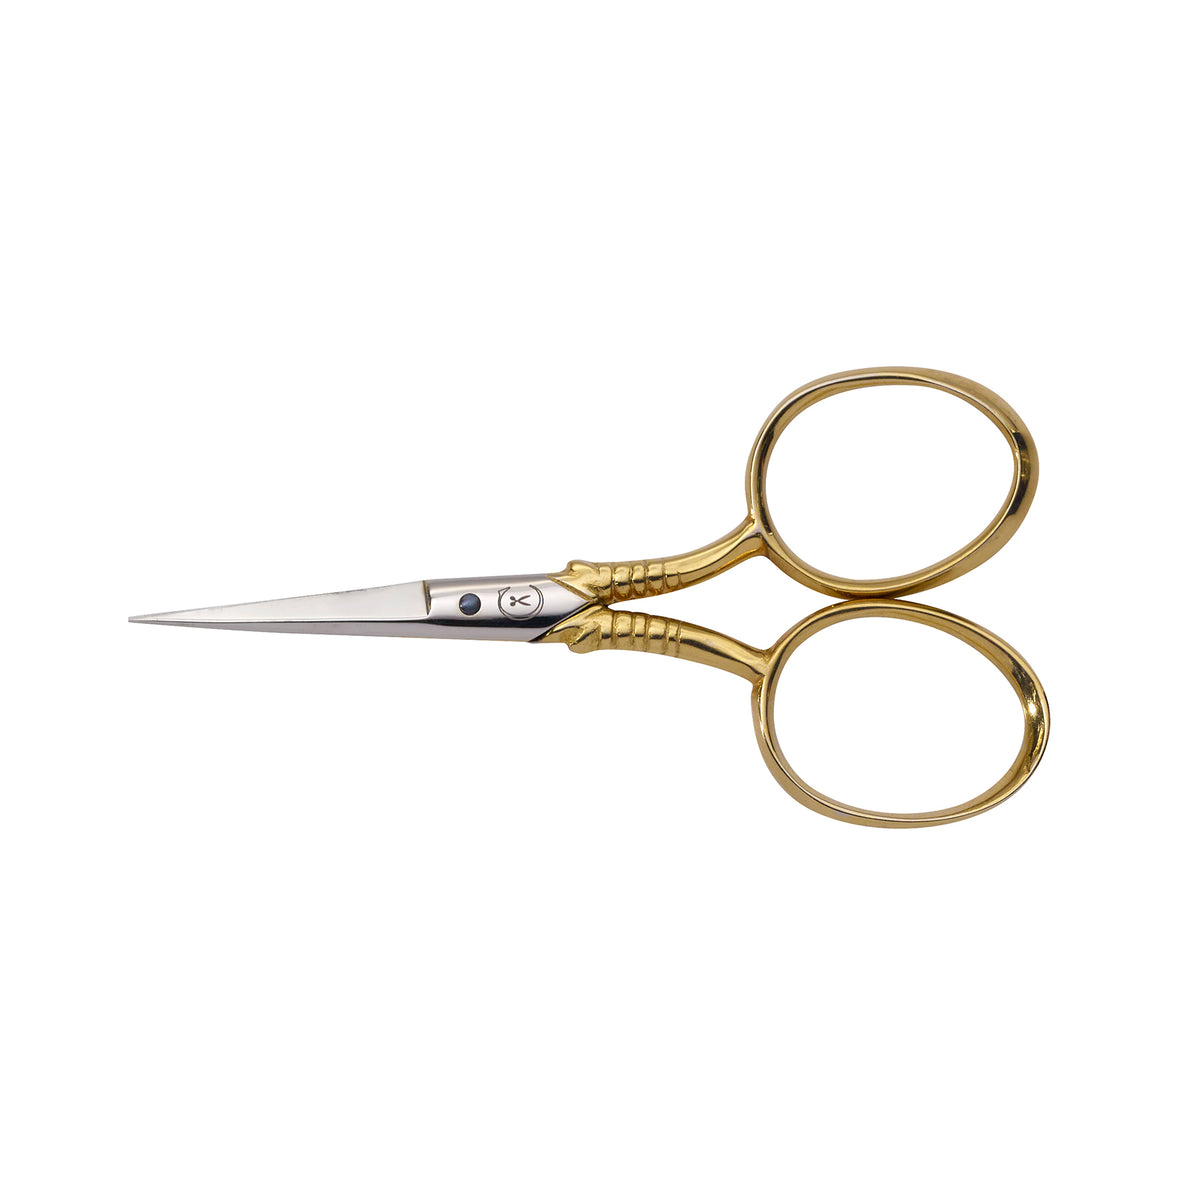 WASA huhnerbein embroidery scissors